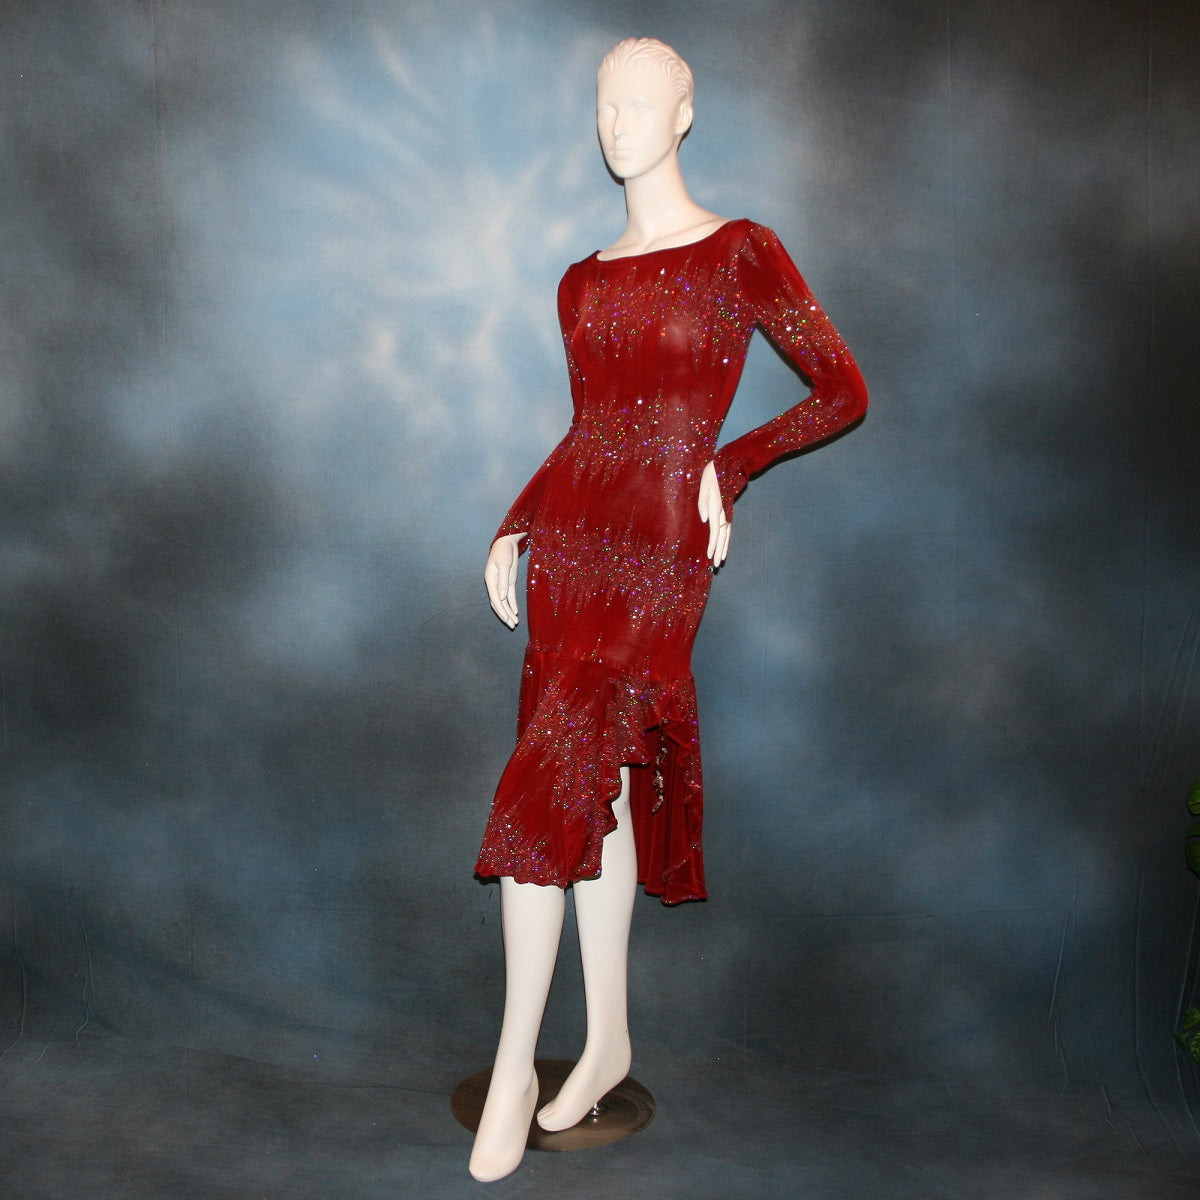 Deep scarlette red Latin/rhythm/tango dress created in glitter slinky with an awesome electrifying glitter pattern features lattice detailing in the back, long sleeves with Swarovski hand beading in the skirt sides.